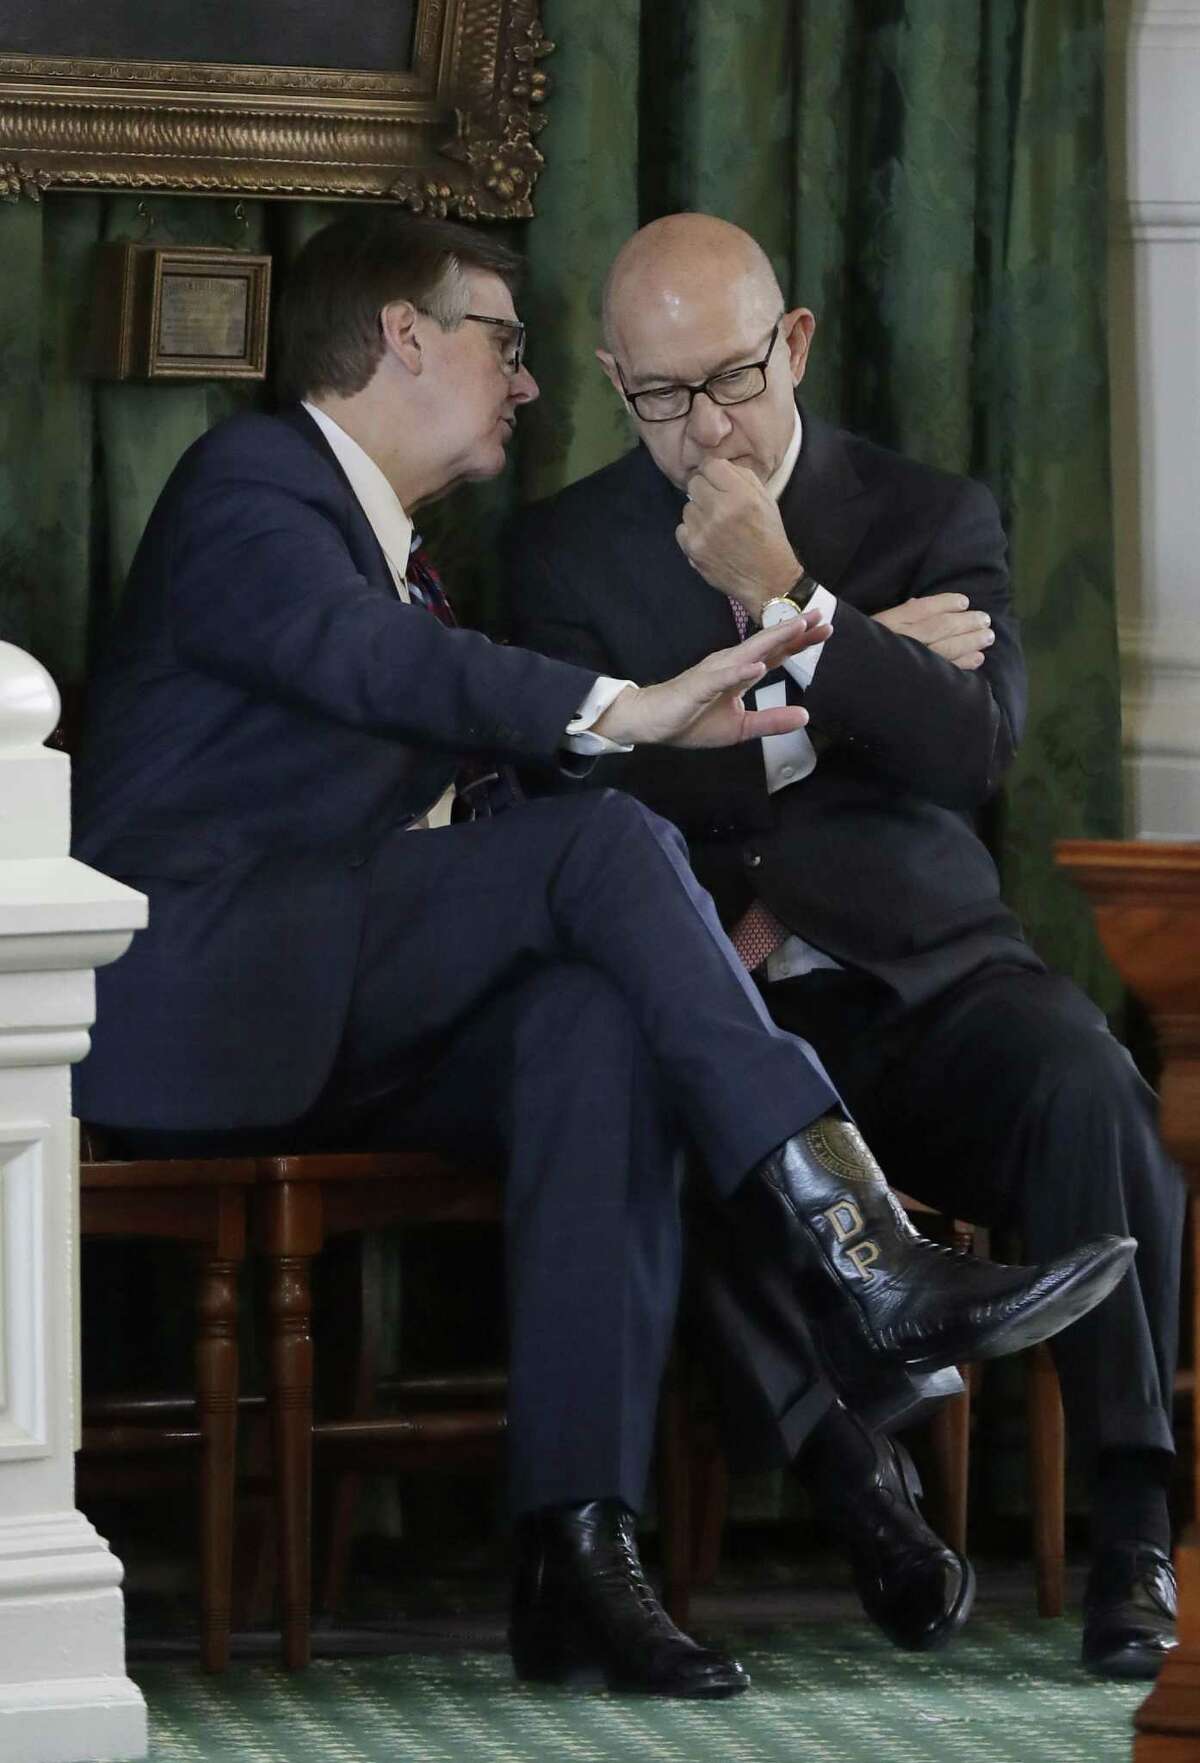 Texas Lt. Gov. Dan Patrick, left, and Sen. John Whitmire, D-Houston, right, talk before the final vote on an anti-"sanctuary cities" bill, Wednesday, Feb. 8, 2017, at the Texas Capitol in Austin, Texas. A late tweak to the bill zooming through the state Senate calls for jail time for sheriffs and other law enforcement officials who refuse to enforce federal immigration law and potentially allows for their removal from office. (AP Photo/Eric Gay)